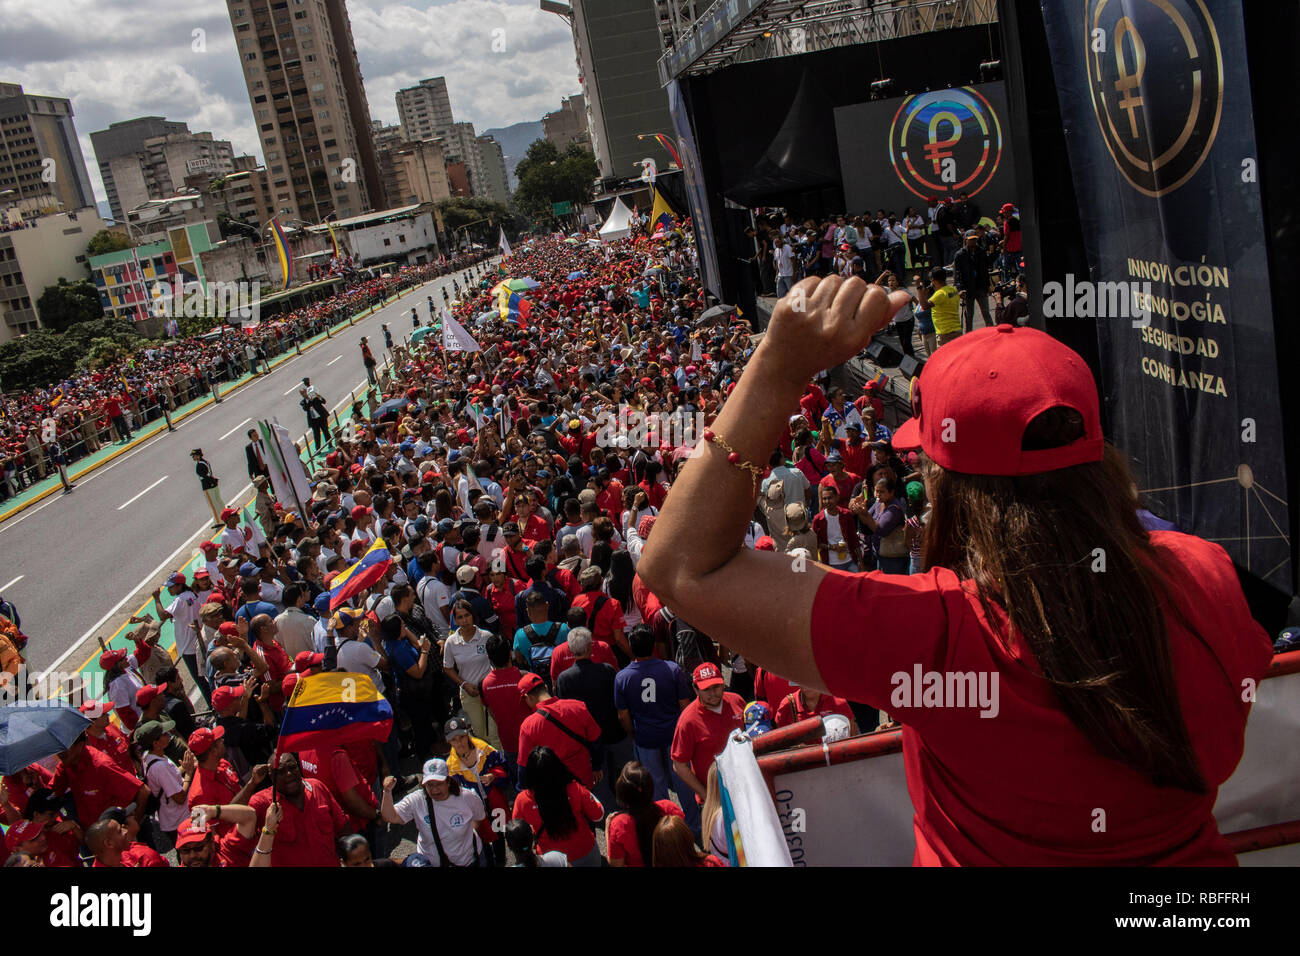 Caracas, Venezuela. 10th Jan, 2019. Supporters of the Venezuelan government take part in a rally in red in support of President Maduro. Maduro was sworn in for his second term. Numerous states, international organizations and the Venezuelan opposition spoke of an undemocratic electoral process and did not recognize the result of the last election. Credit: Rayner Pena/dpa/Alamy Live News Stock Photo